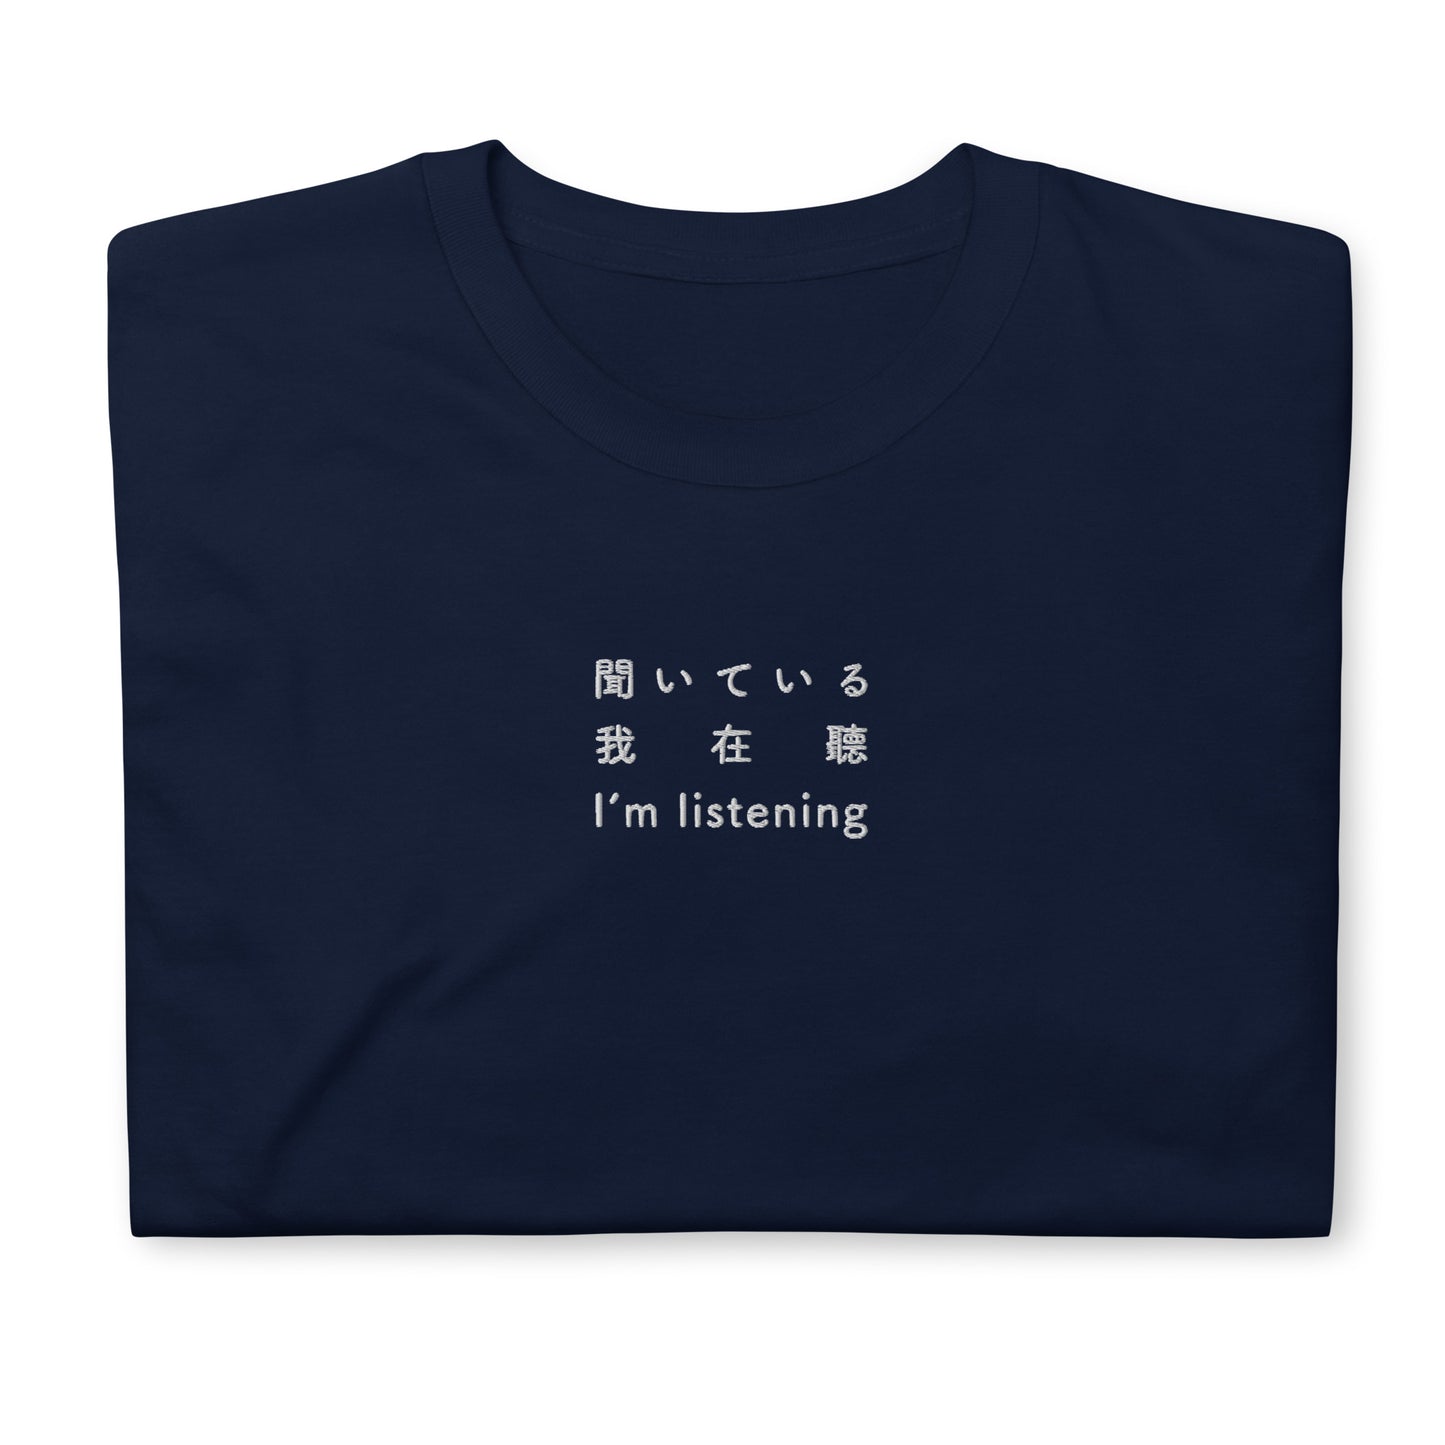 Navy High Quality Tee - Front Design with an White Embroidery "I'm listening" in Japanese,Chinese and English